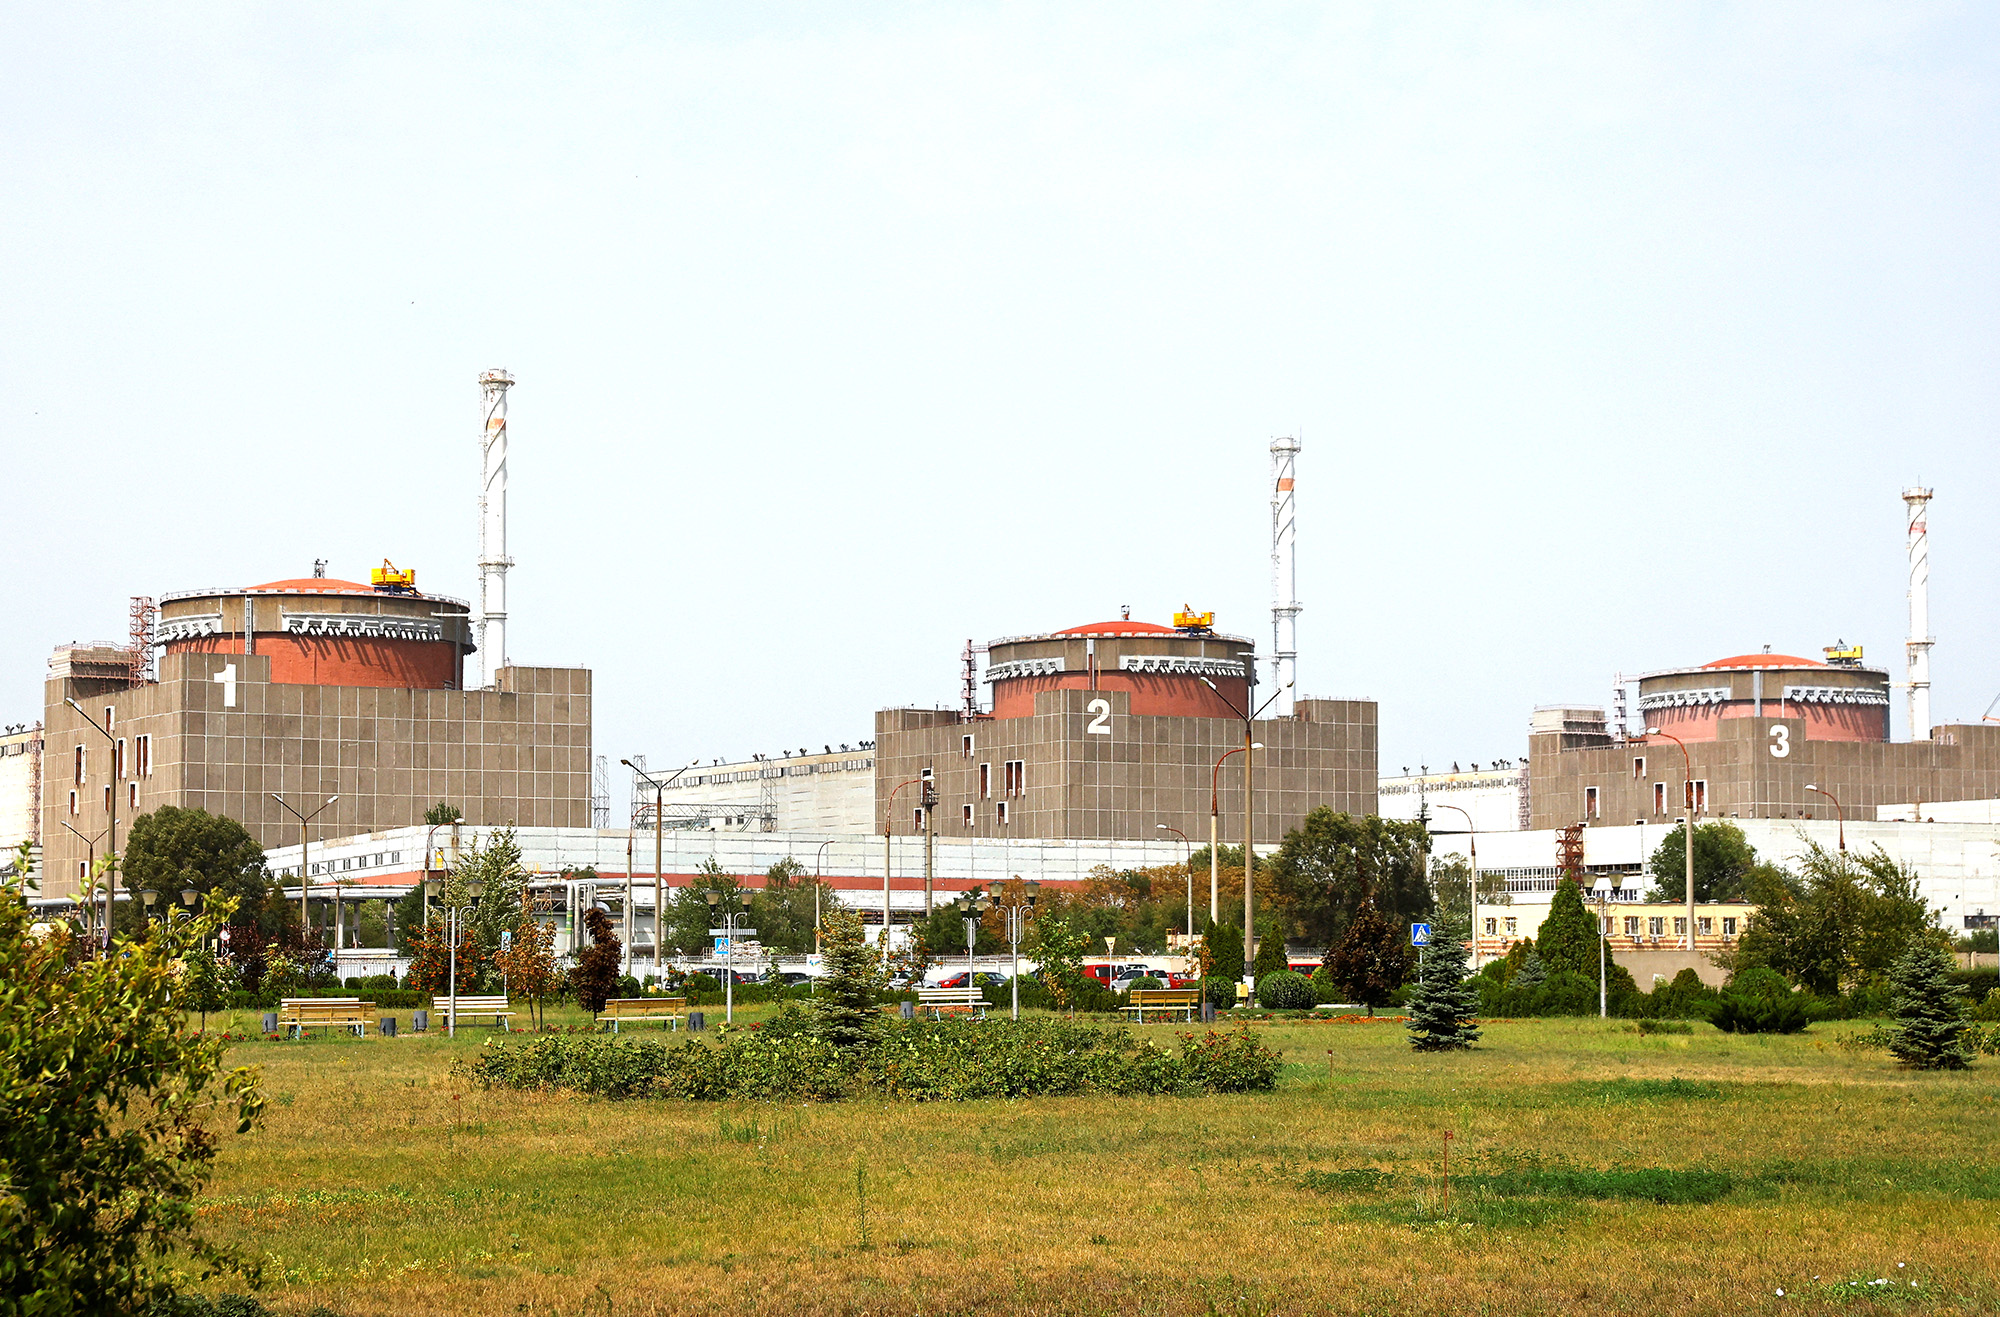 The Zaporizhzhia Nuclear Power Plant outside the Russian-controlled city of Enerhodar, Ukraine, on August 22.